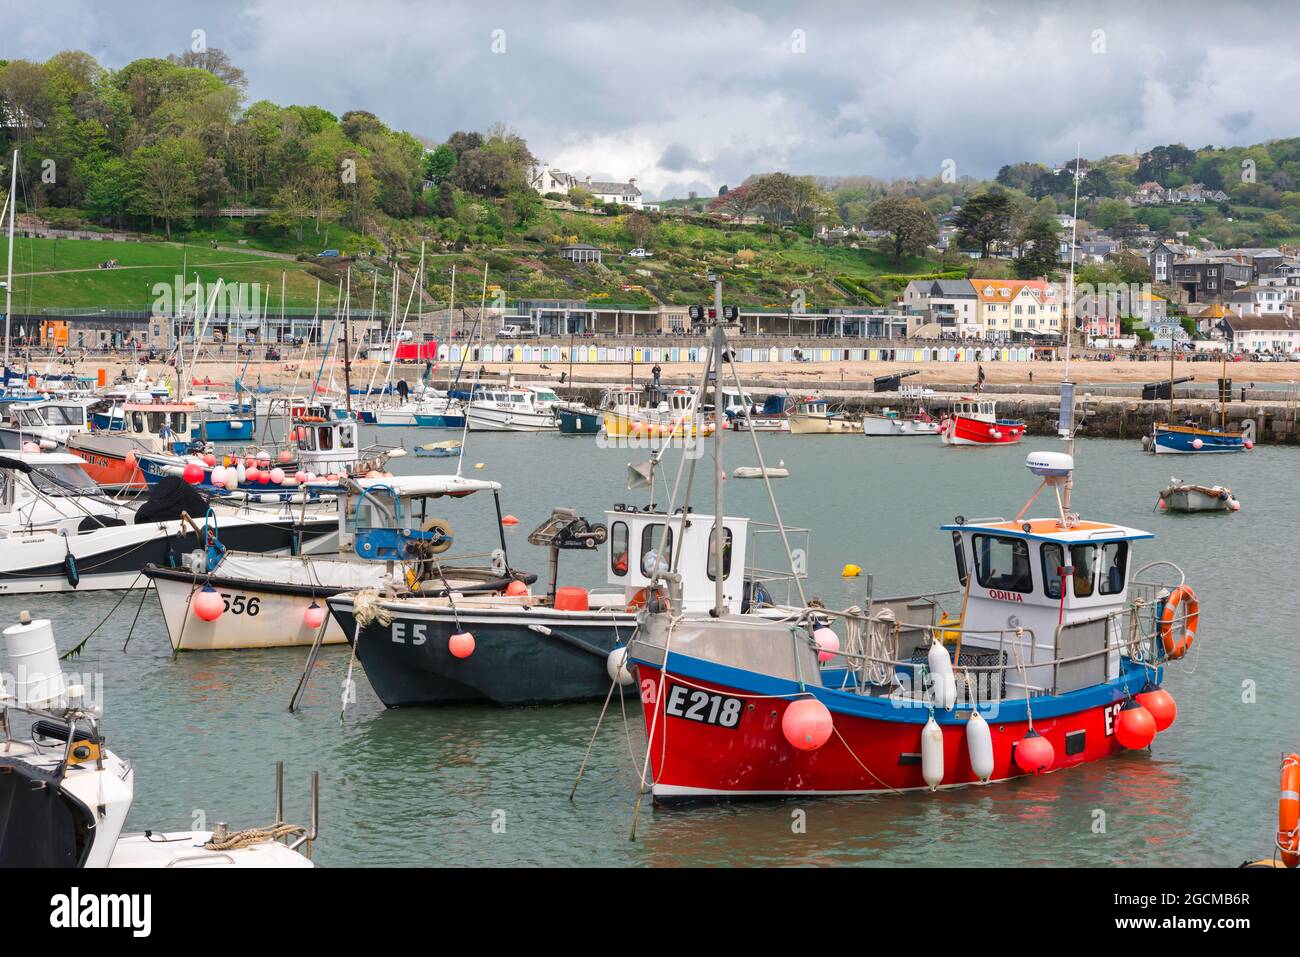 Lyme Regis harbour, view of fishing boats moored in the harbour at Lyme Regis, Dorset, England, UK Stock Photo